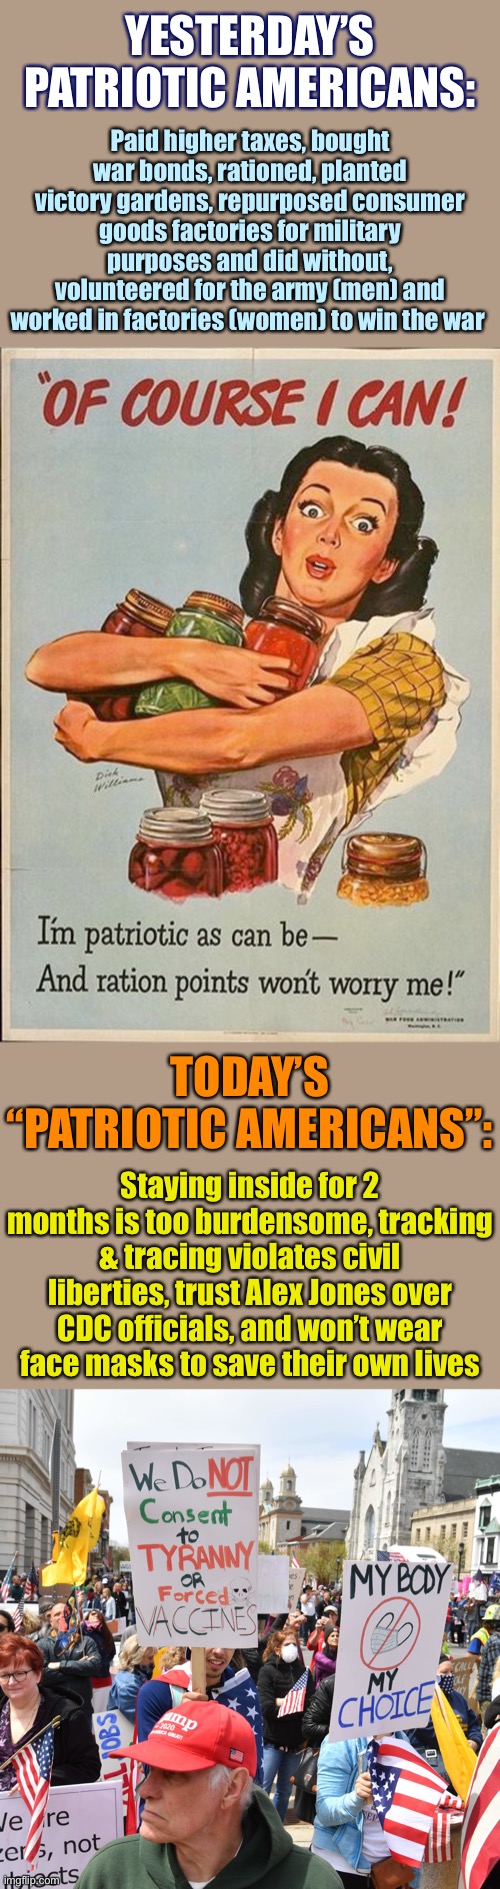 A history of American greatness, then and now. | YESTERDAY’S PATRIOTIC AMERICANS:; Paid higher taxes, bought war bonds, rationed, planted victory gardens, repurposed consumer goods factories for military purposes and did without, volunteered for the army (men) and worked in factories (women) to win the war; TODAY’S “PATRIOTIC AMERICANS”:; Staying inside for 2 months is too burdensome, tracking & tracing violates civil liberties, trust Alex Jones over CDC officials, and won’t wear face masks to save their own lives | image tagged in wwii ration points,tyranny,world war 2,world war ii,conservative logic,covid-19 | made w/ Imgflip meme maker